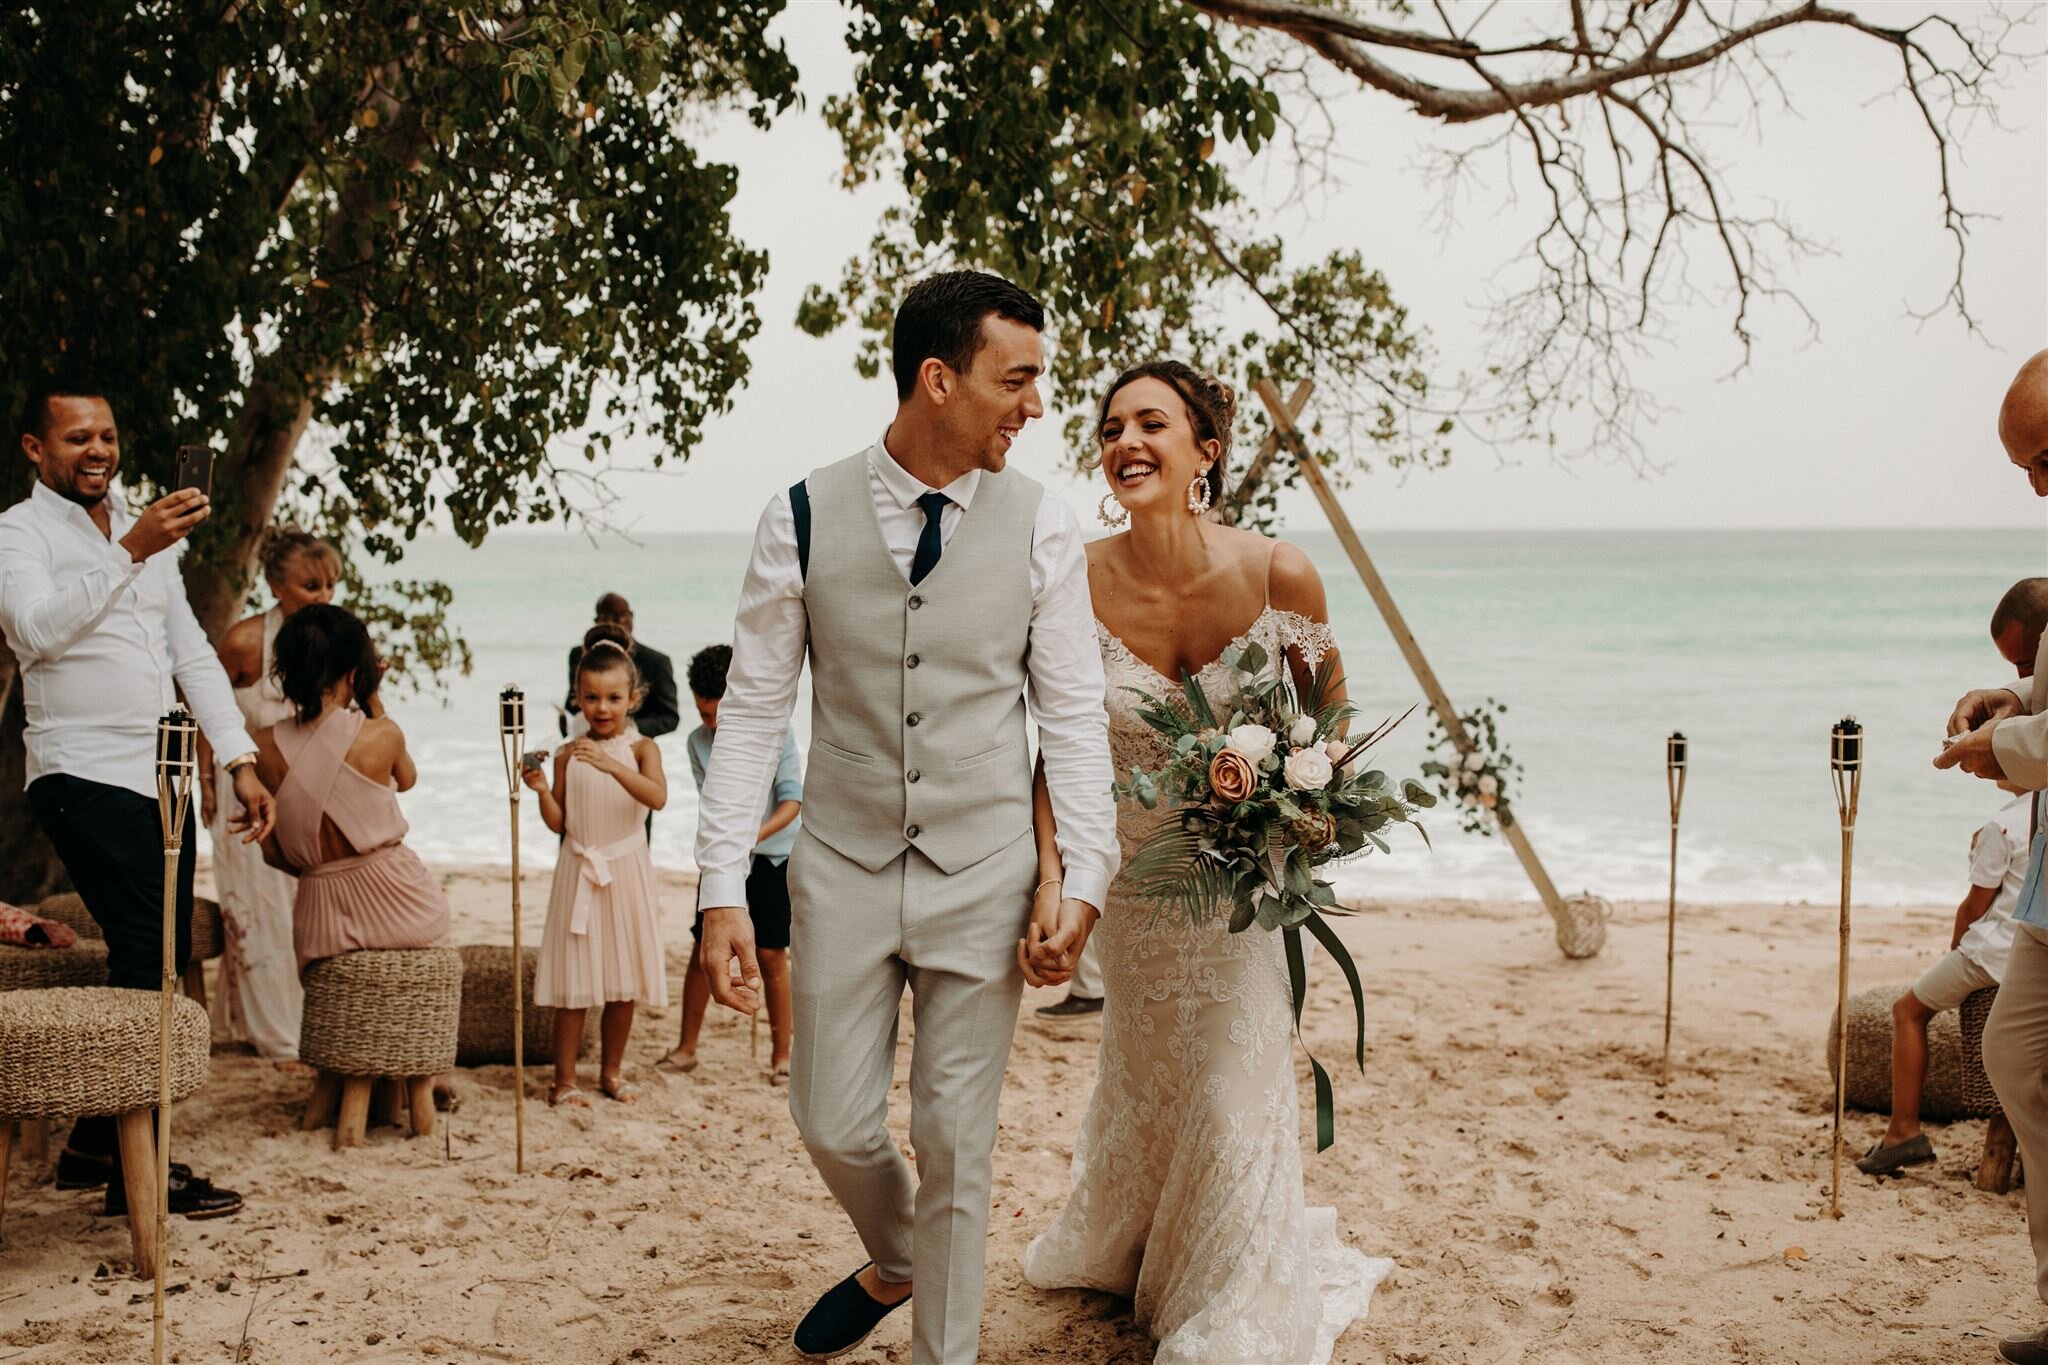 newlyweds laugh and hold hands after boho beach ceremony with friends and family laughing and dancing in the background